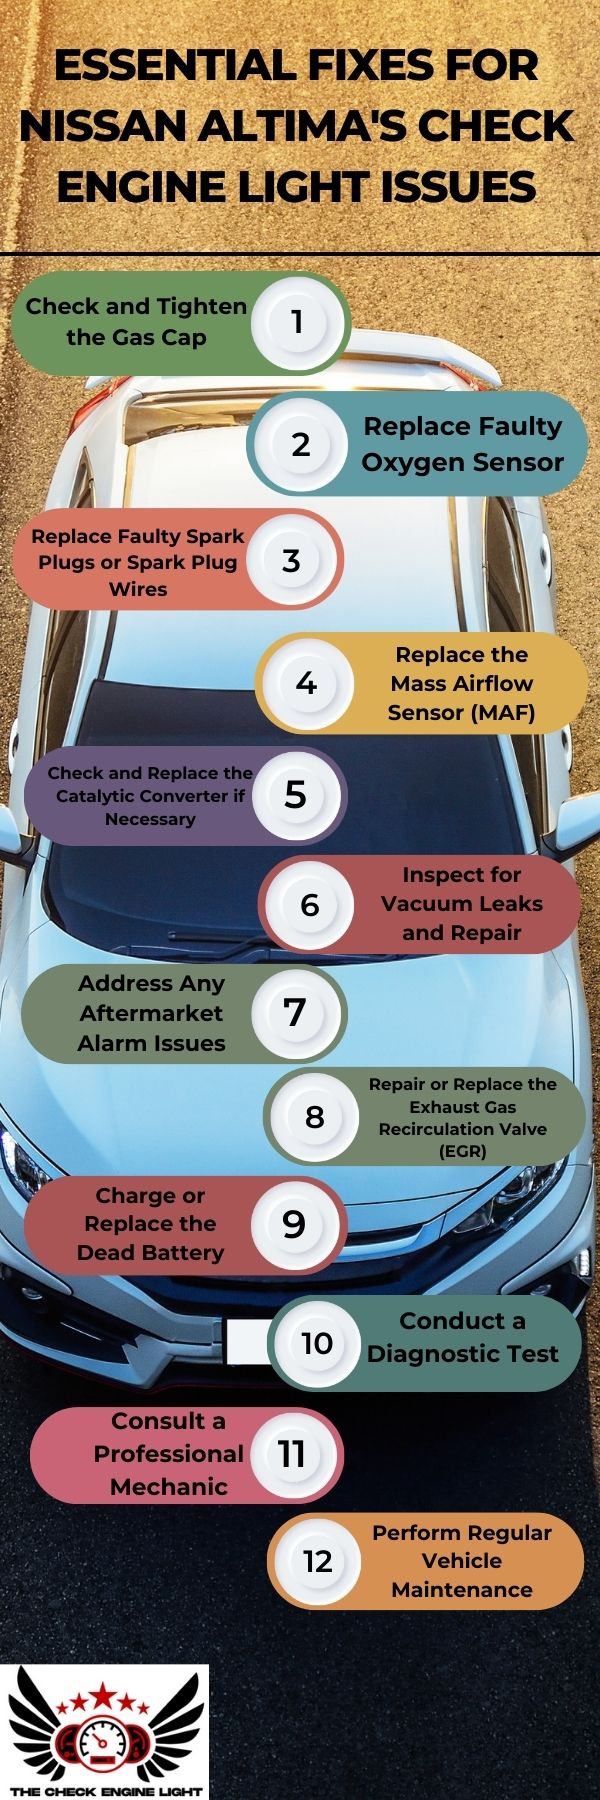 an infographic about Essential Fixes for Nissan Altima's Check Engine Light Issues